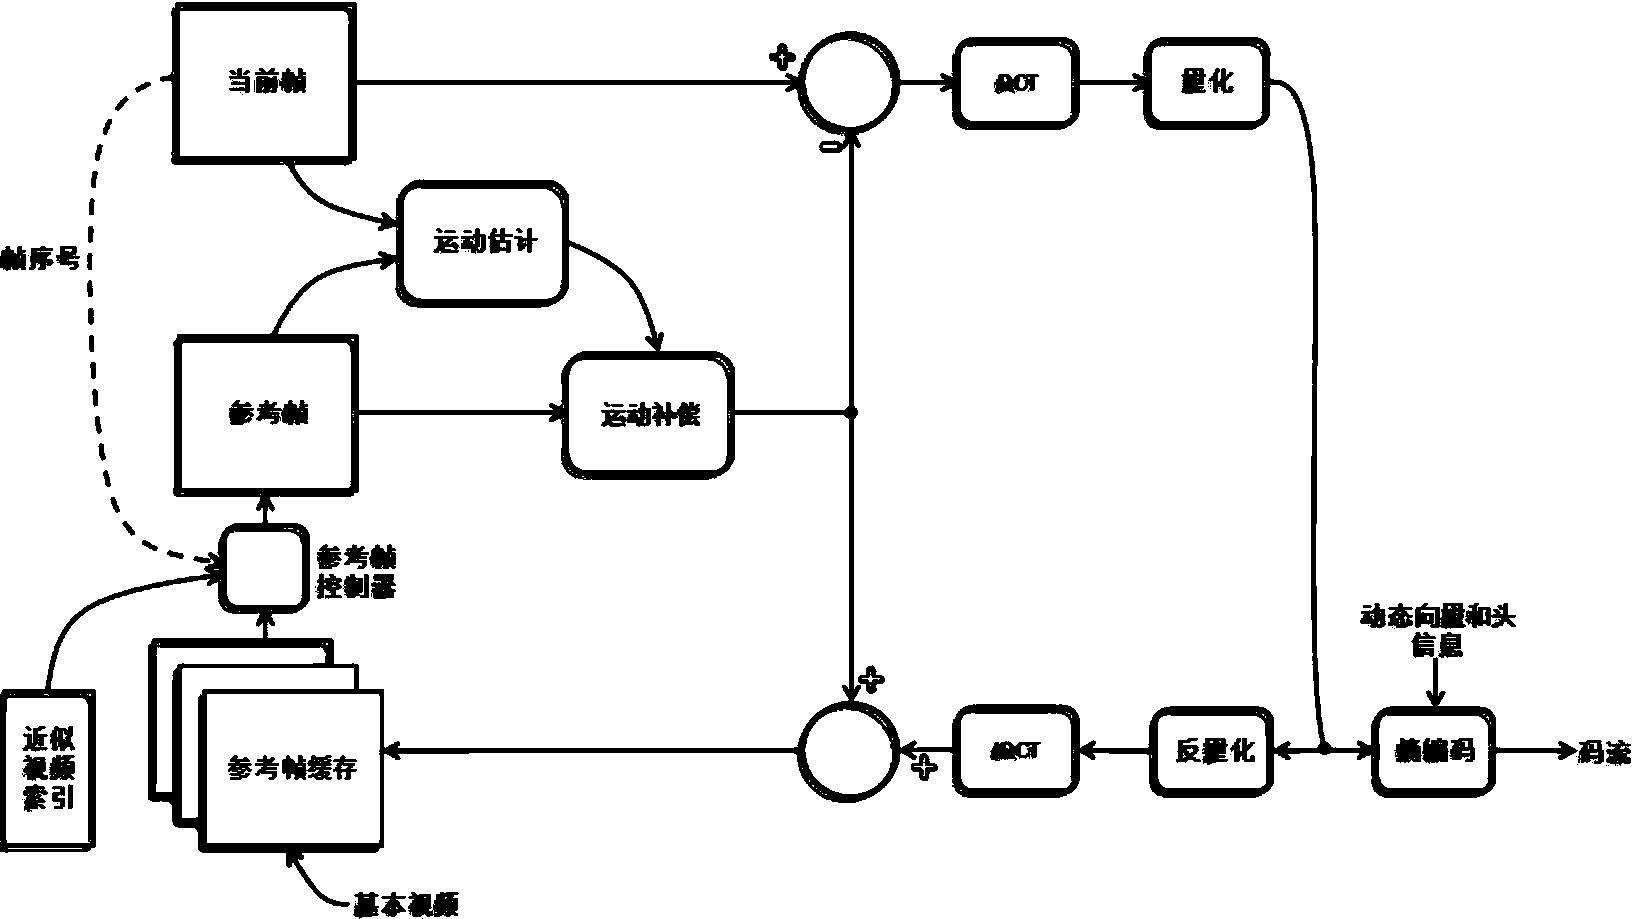 Approximate video encoding system